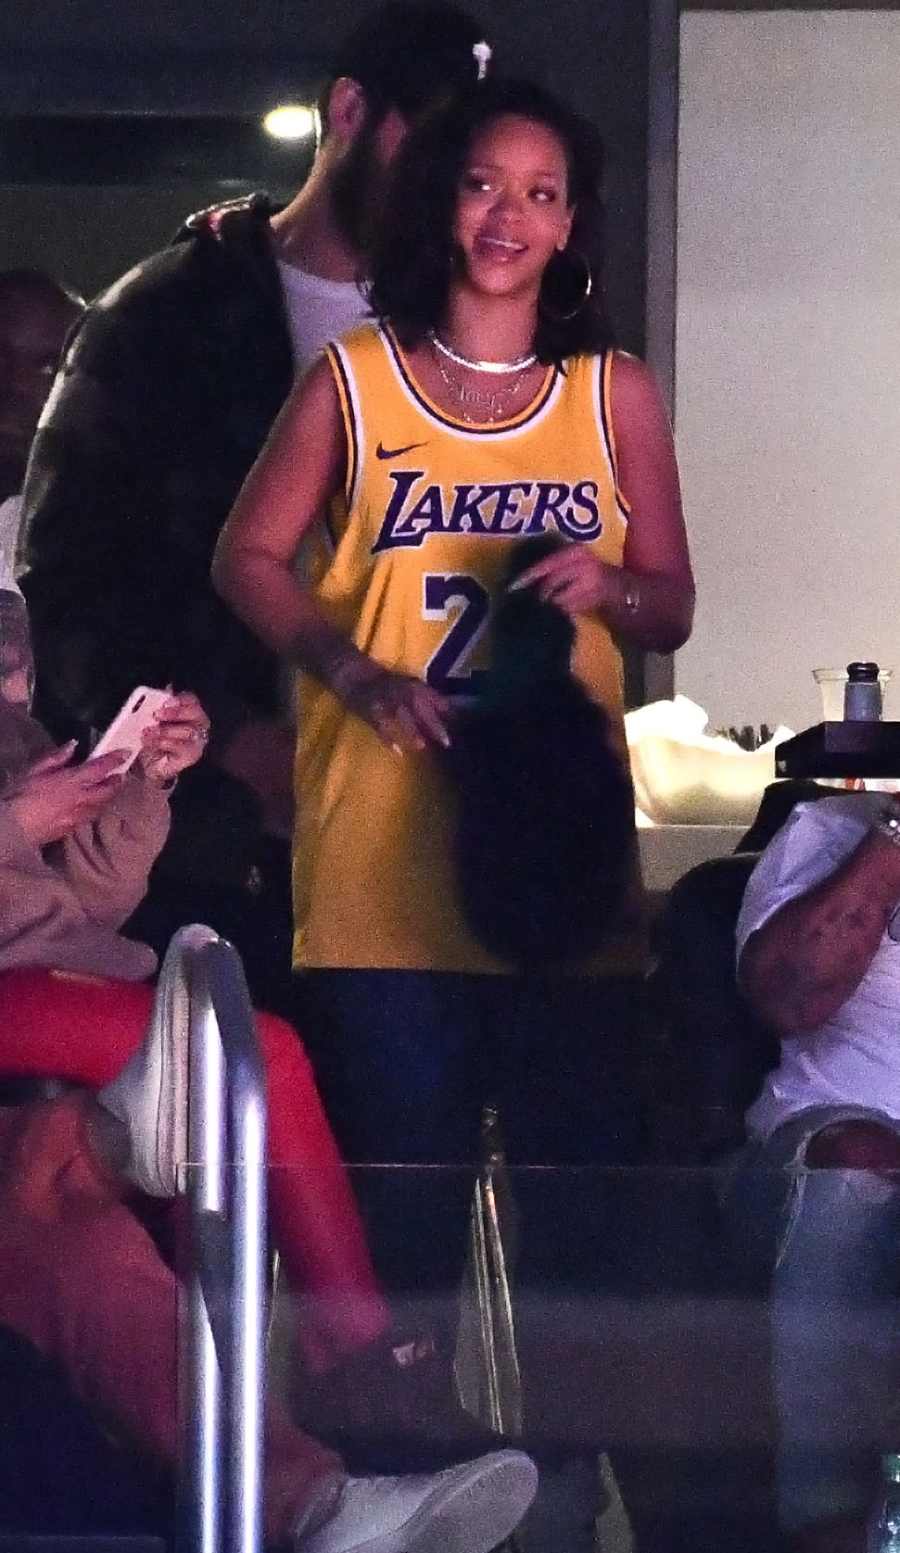 Rihanna Celebrates Her Birthday With Her Boyfriend at Lakers Game